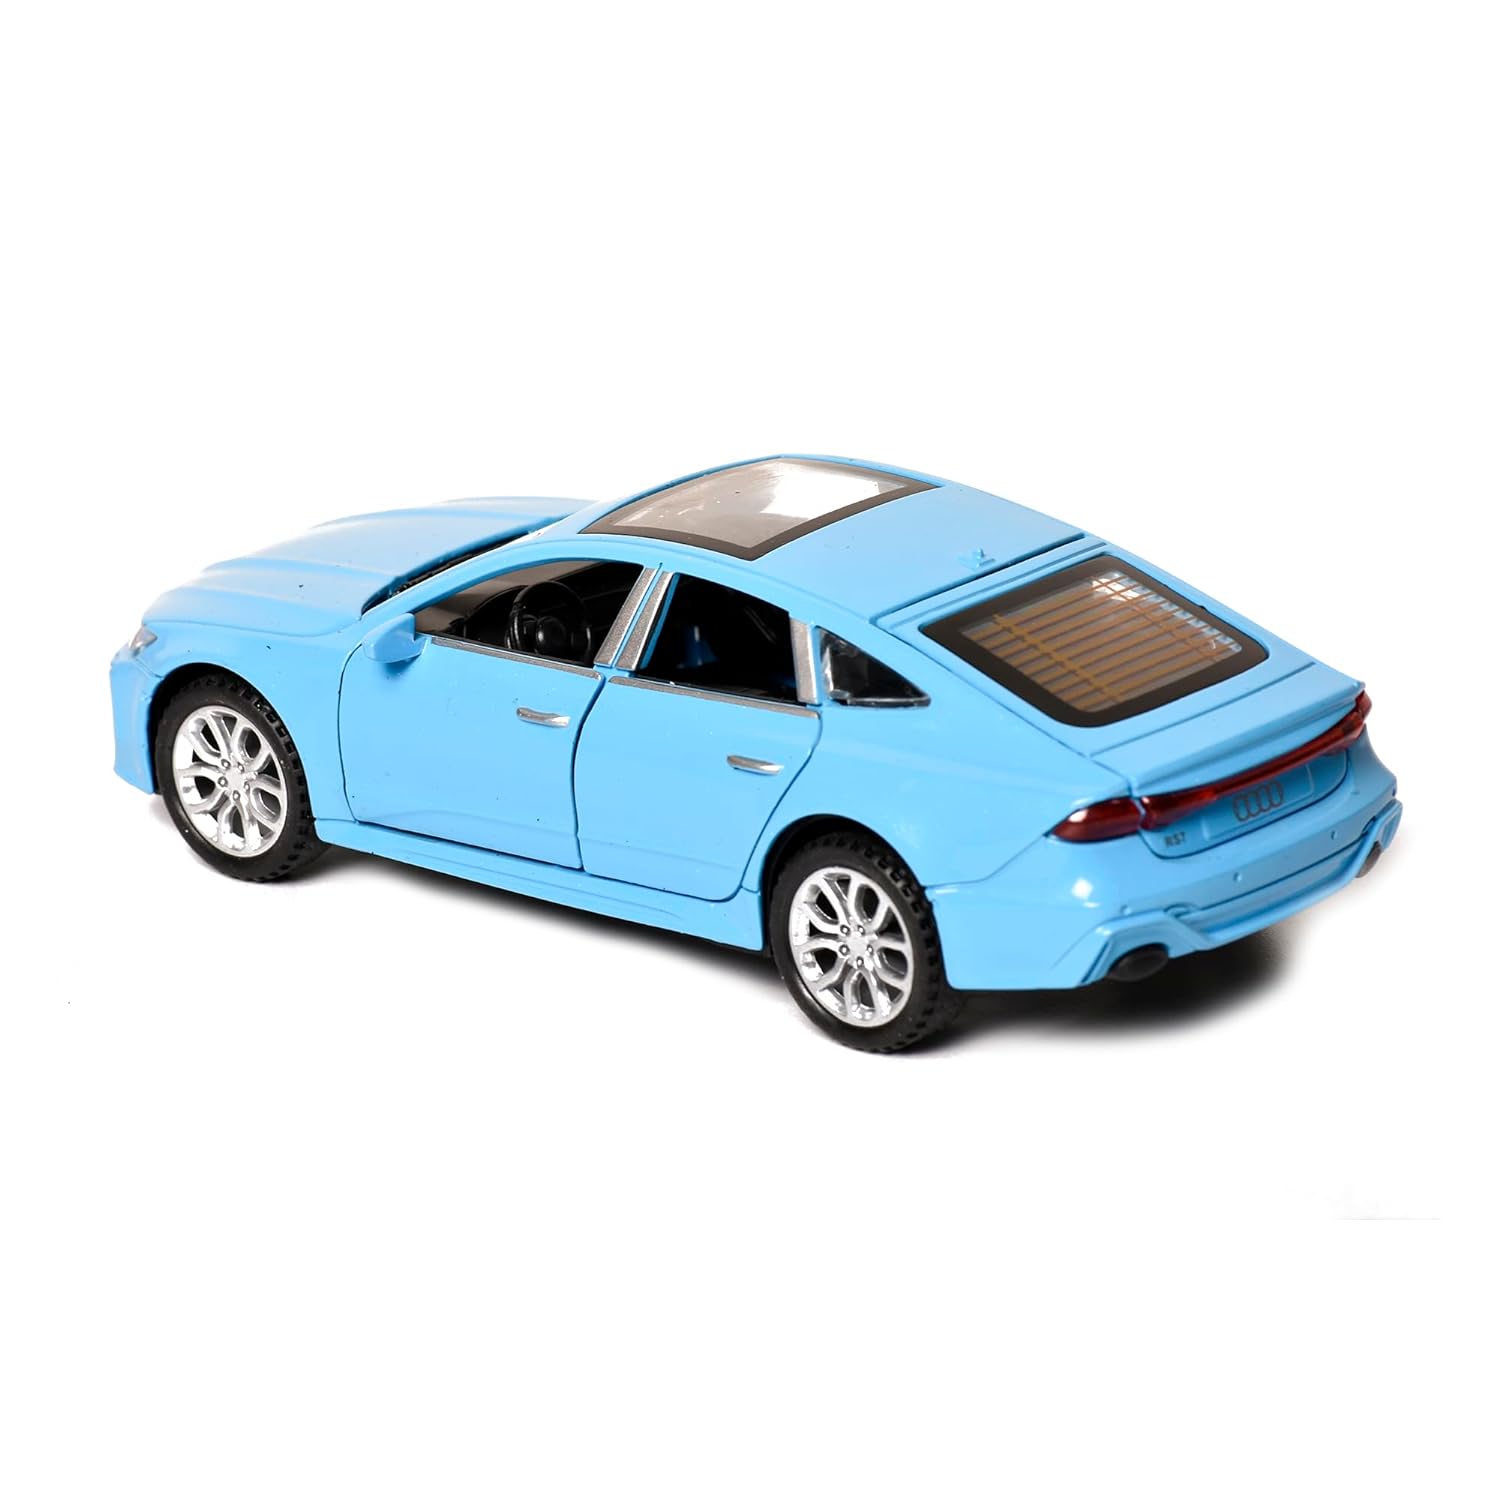 Braintastic Model Diecast Car Toy Vehicle Pull Back Friction Car with Openable Doors Light & Music Toys for Kids Age 3+ Years (AK Metal Series Audi Blue)